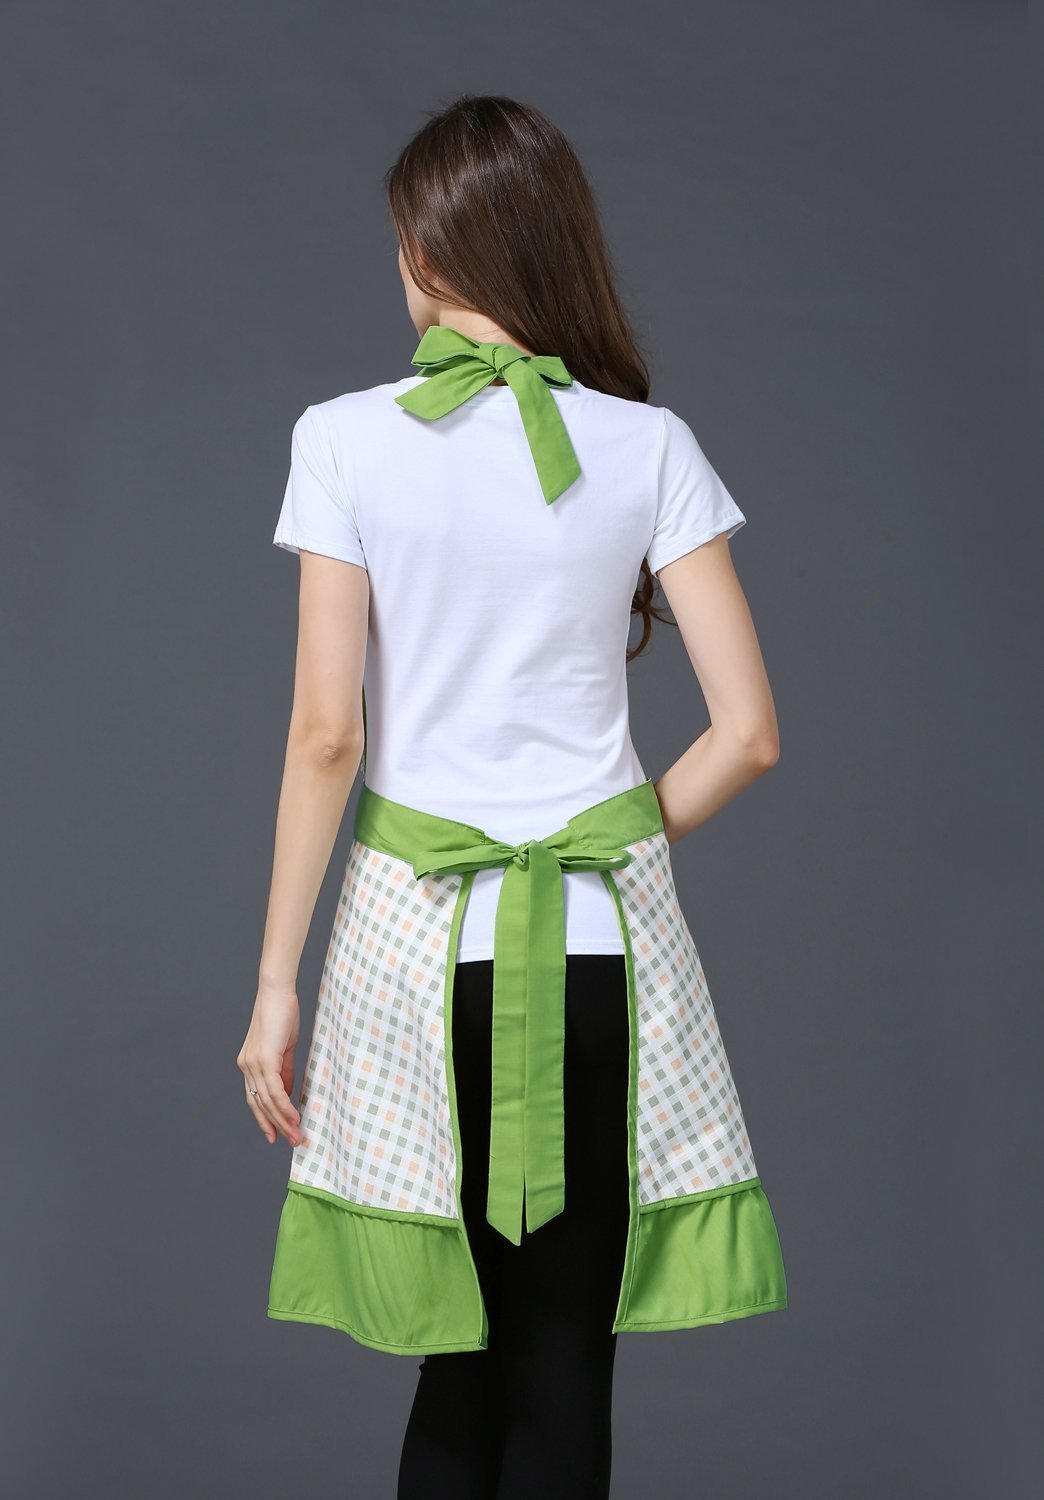 Cute Lovely Unique Design Women Girls Ladies Retro Apron with Chic Pocket for Cooking Kitchen, Green